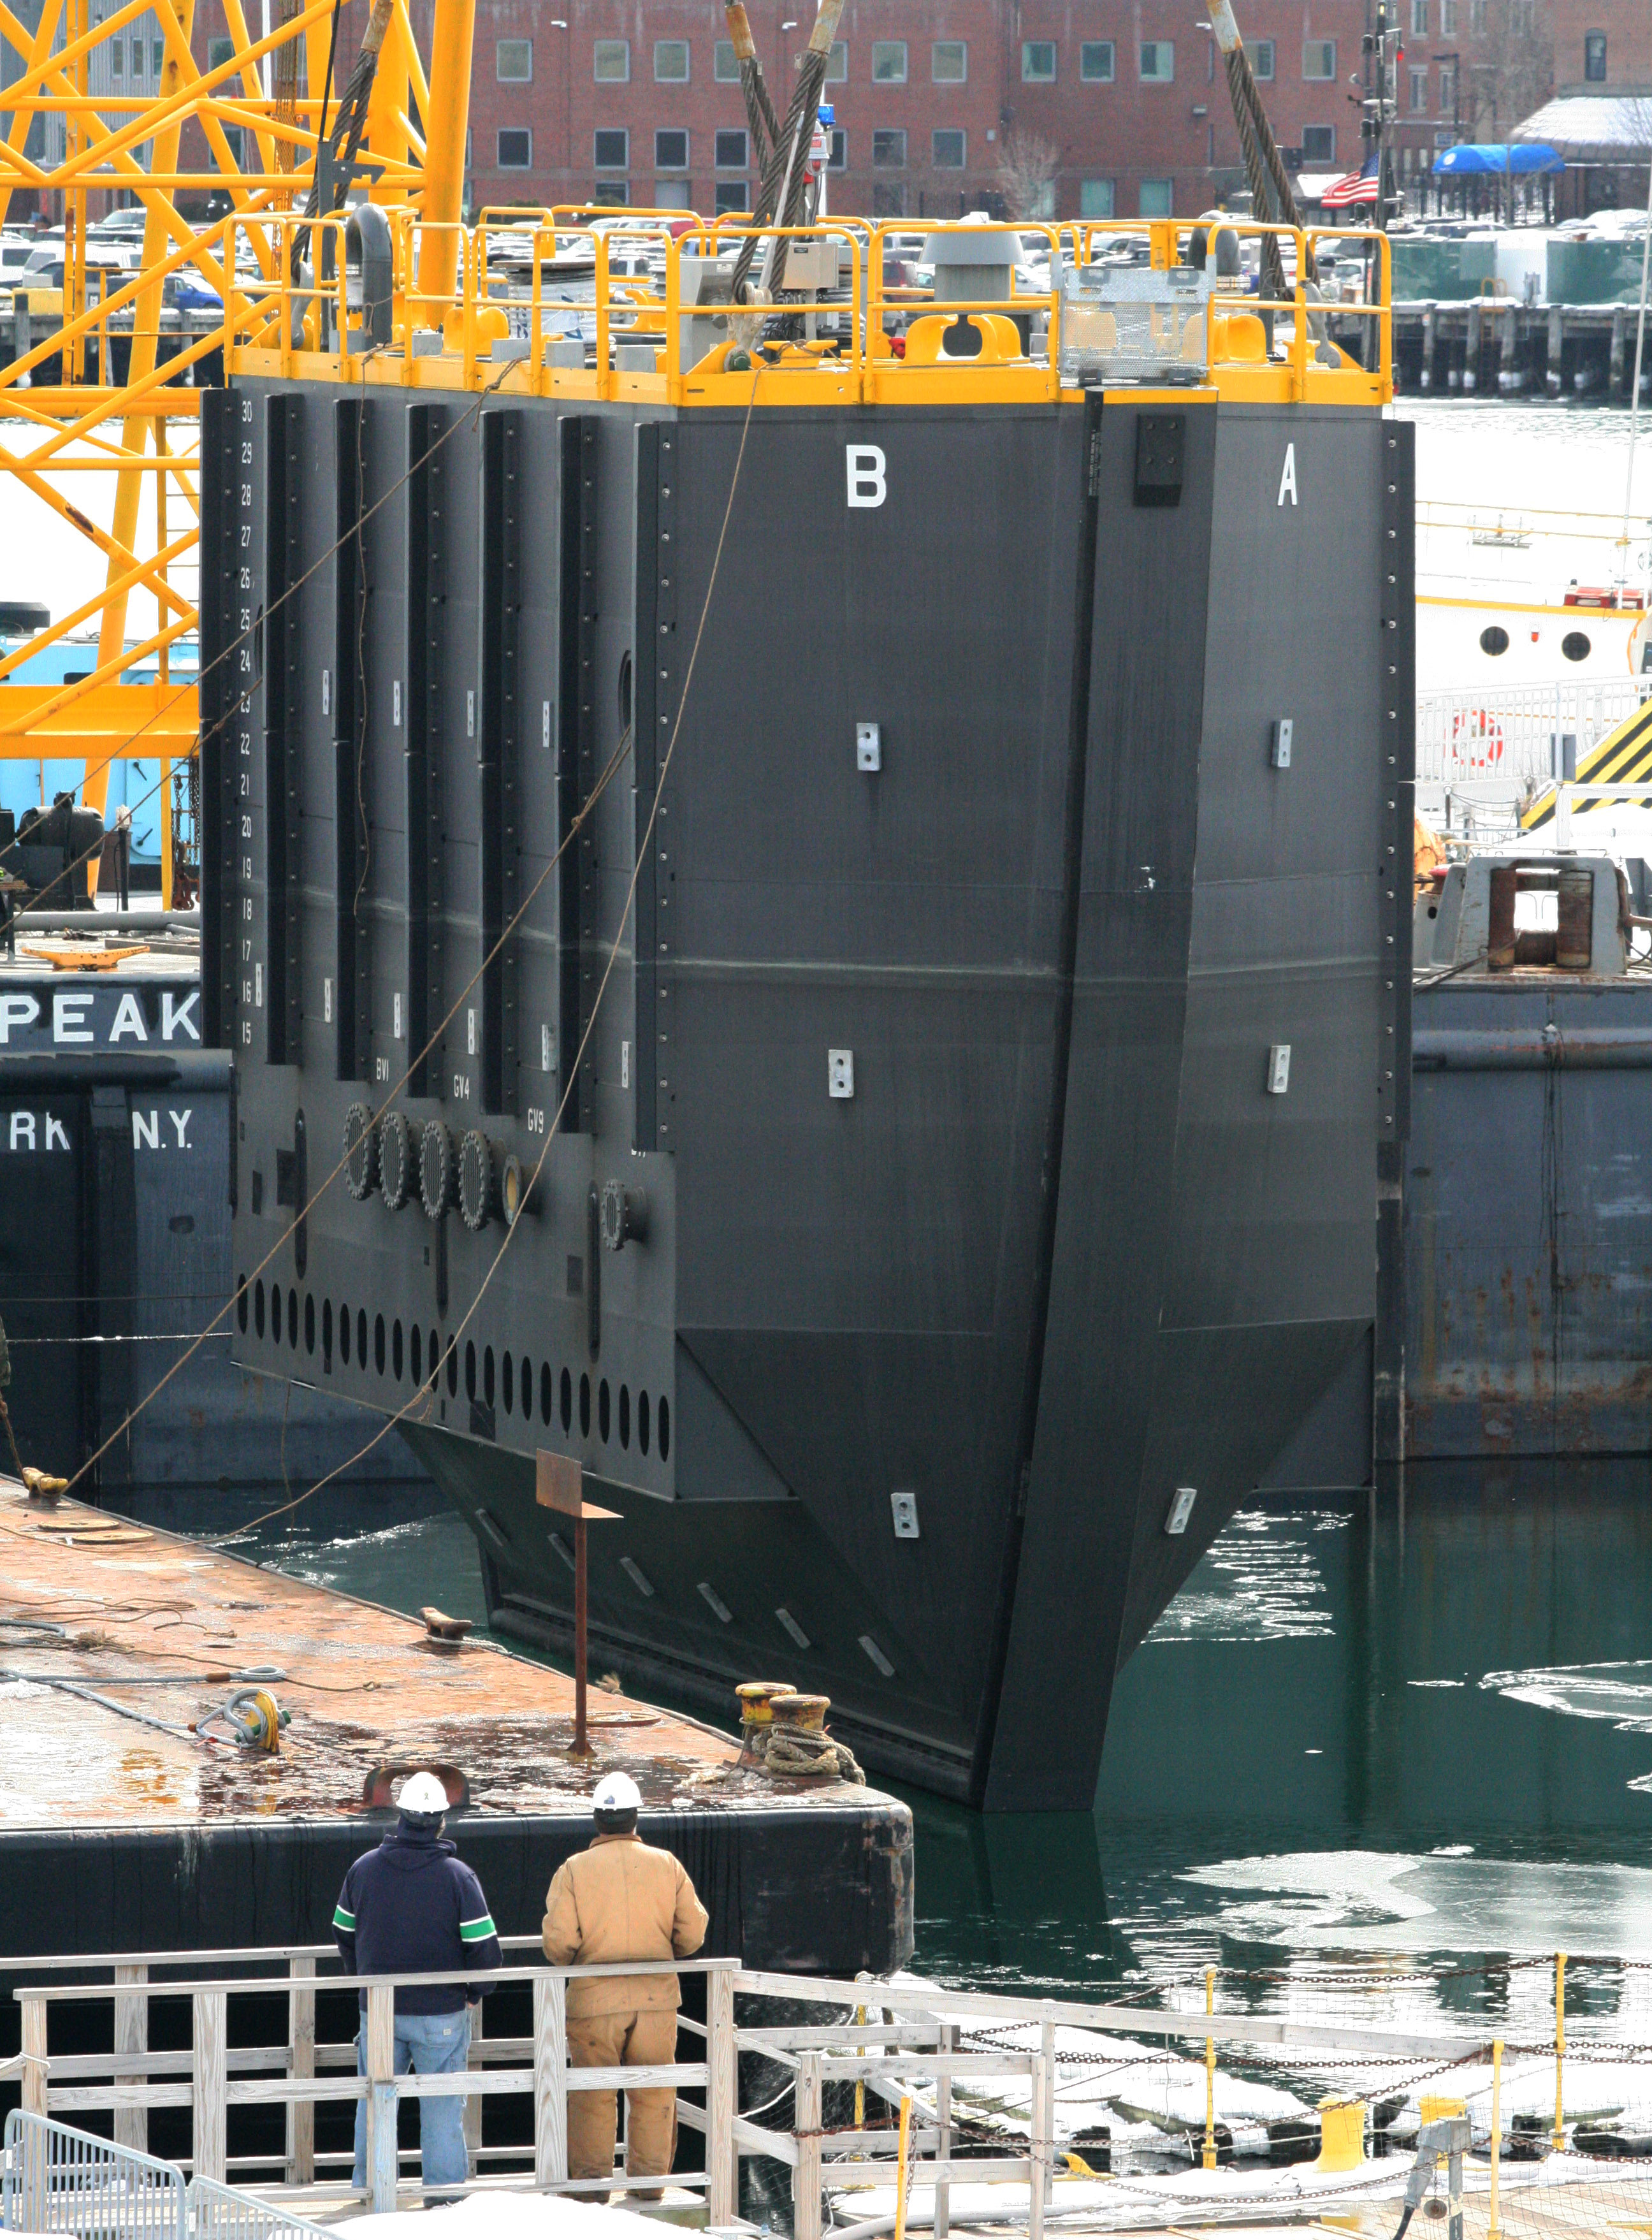 The new caisson is lifted from the barge and placed into Boston Harbor, March 2015. [Courtesy Naval History & Heritage Command Detachment Boston]